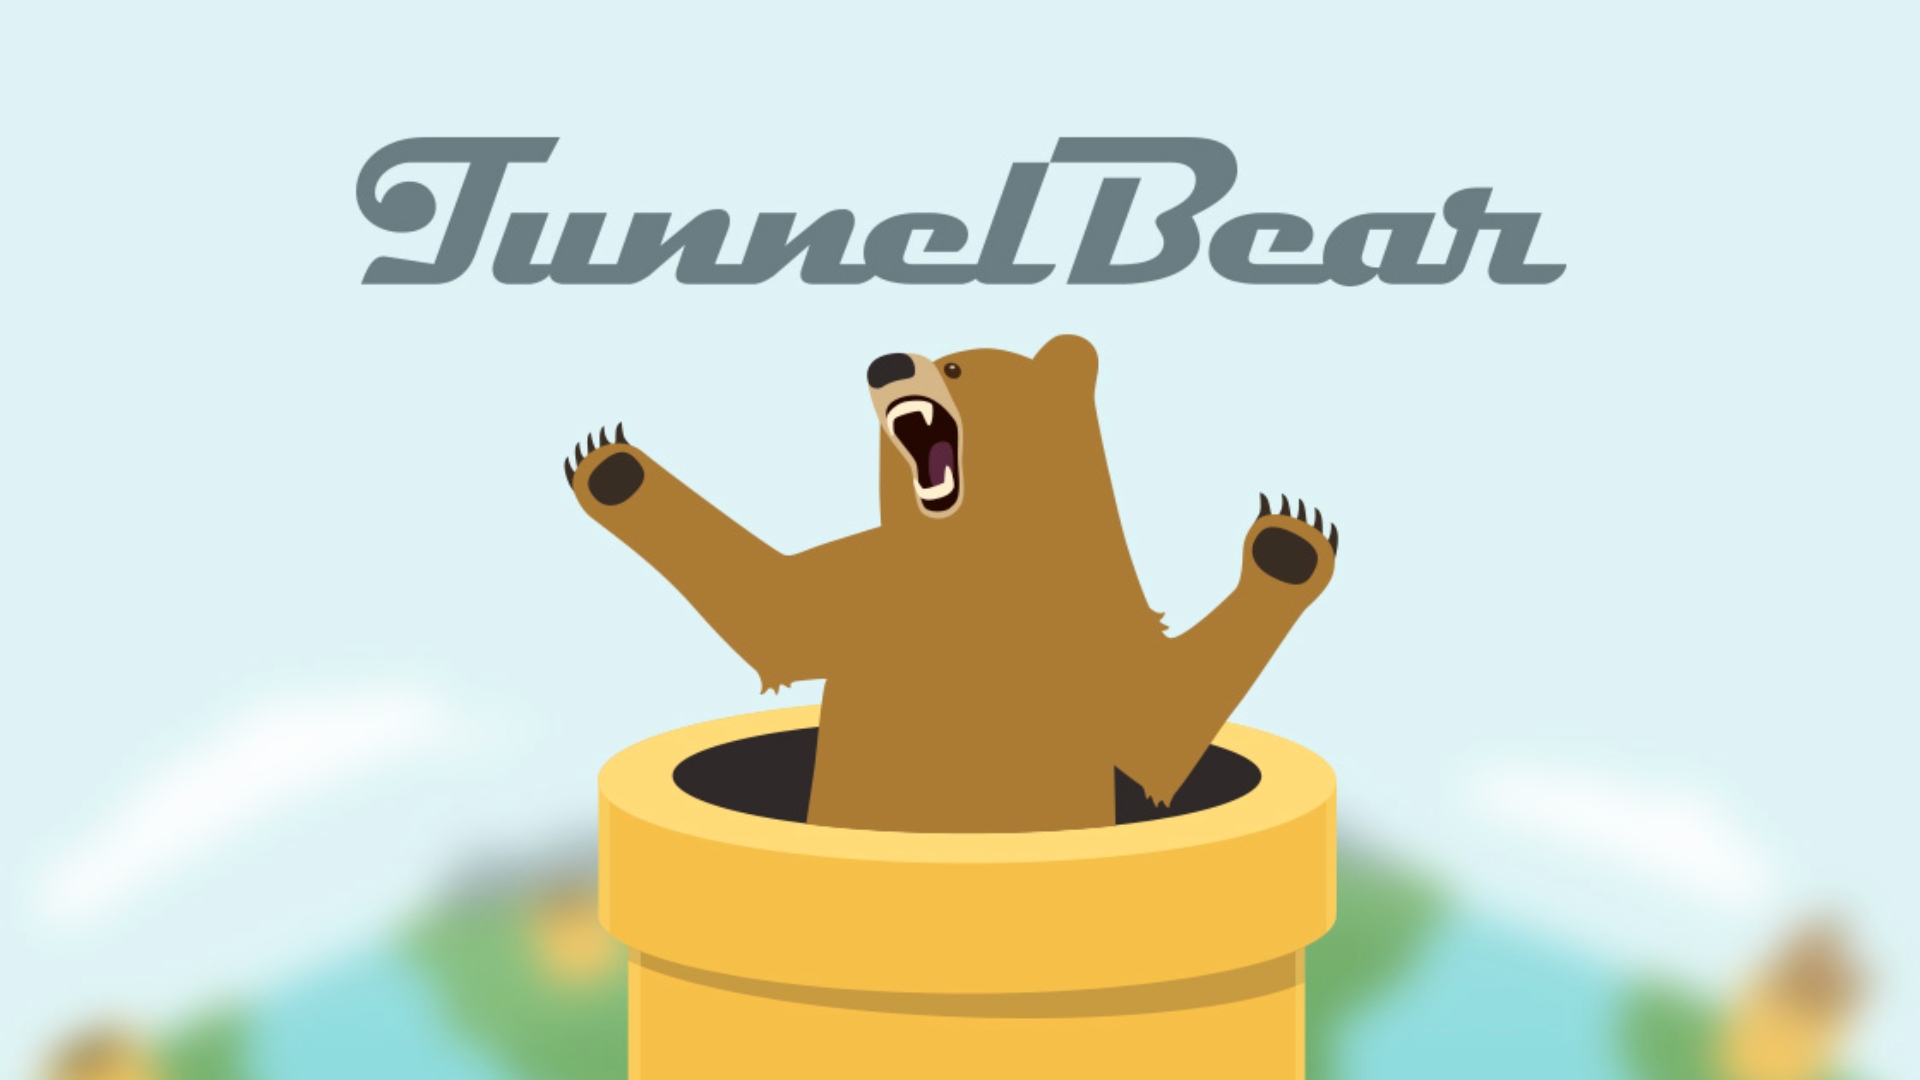 Best VPN for iPhone - TunnelBear. Image shows a bear emerging from a pipe beneath the logo of TunnelBear.